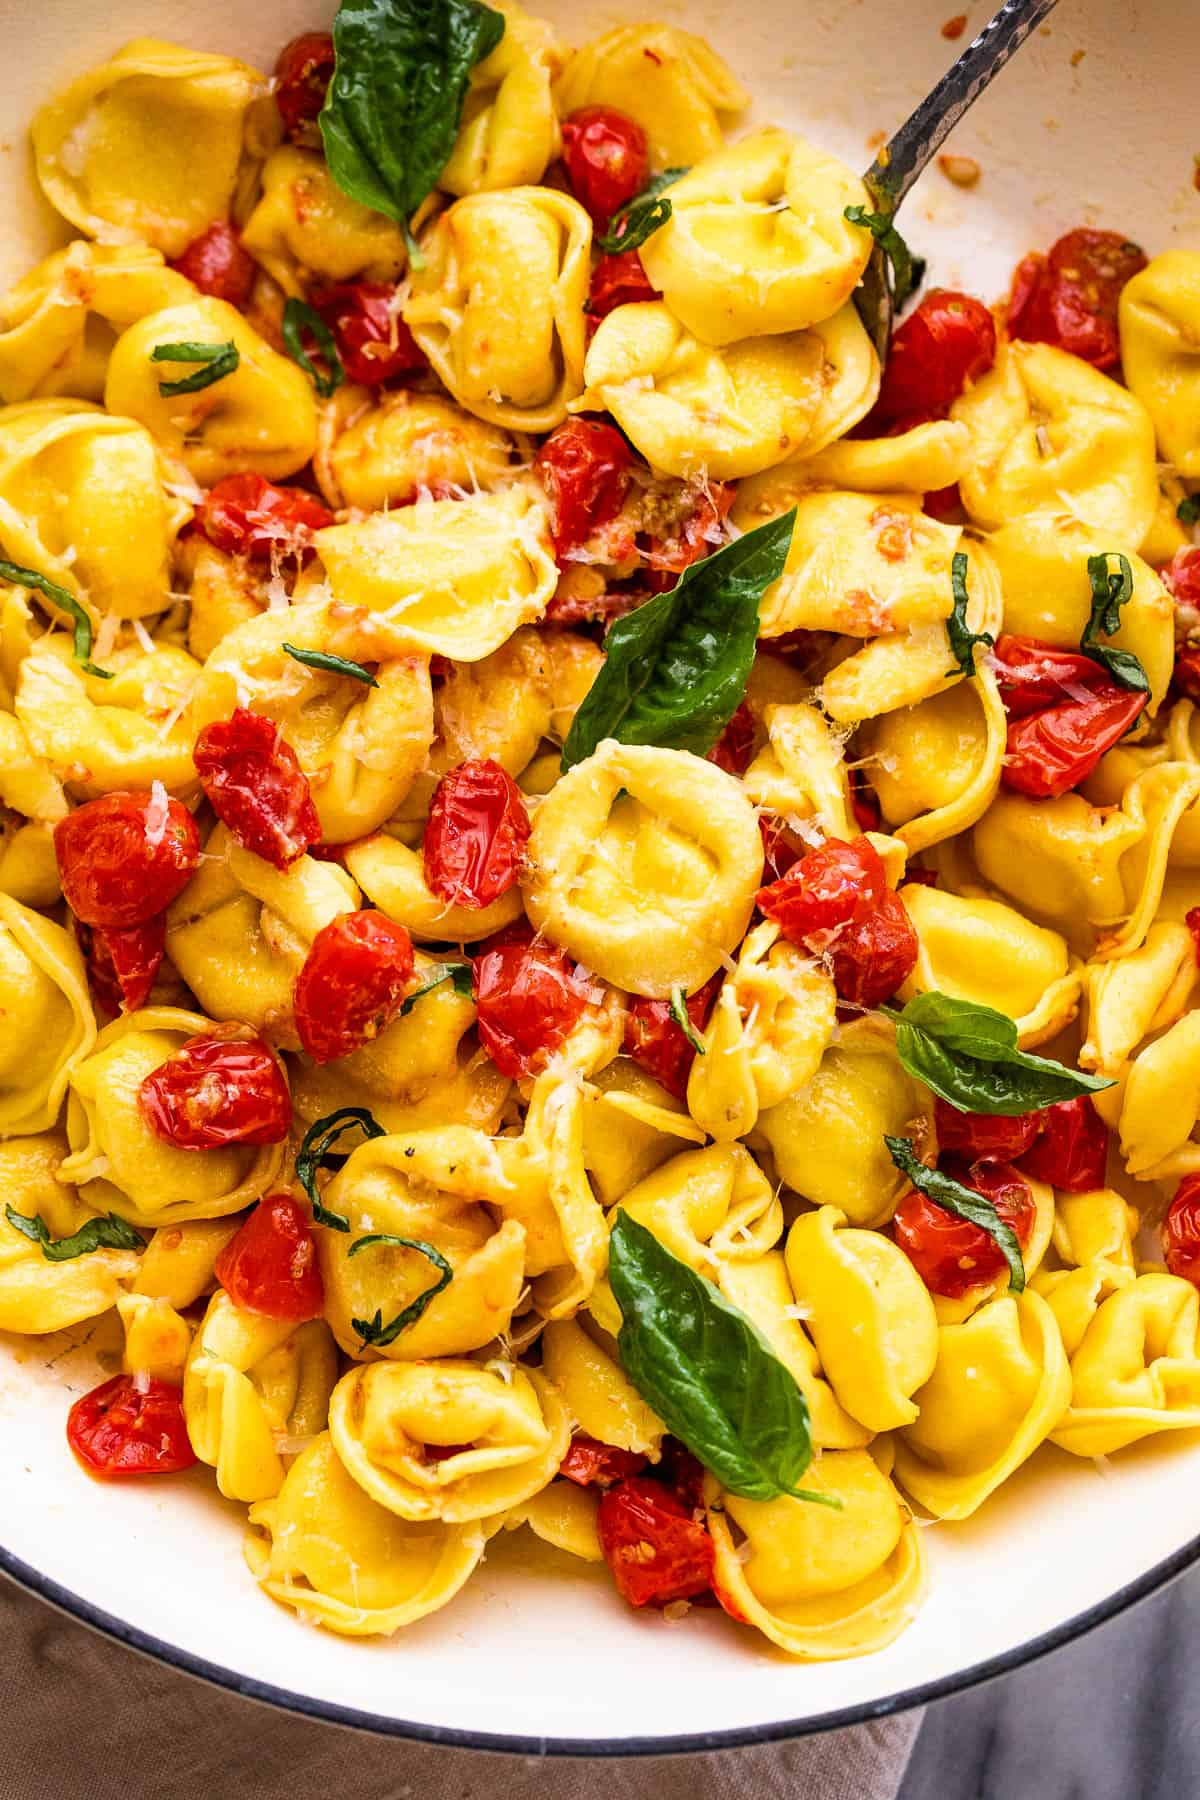 tortellini pasta tossed with cherry tomatoes and garnished with basil leaves